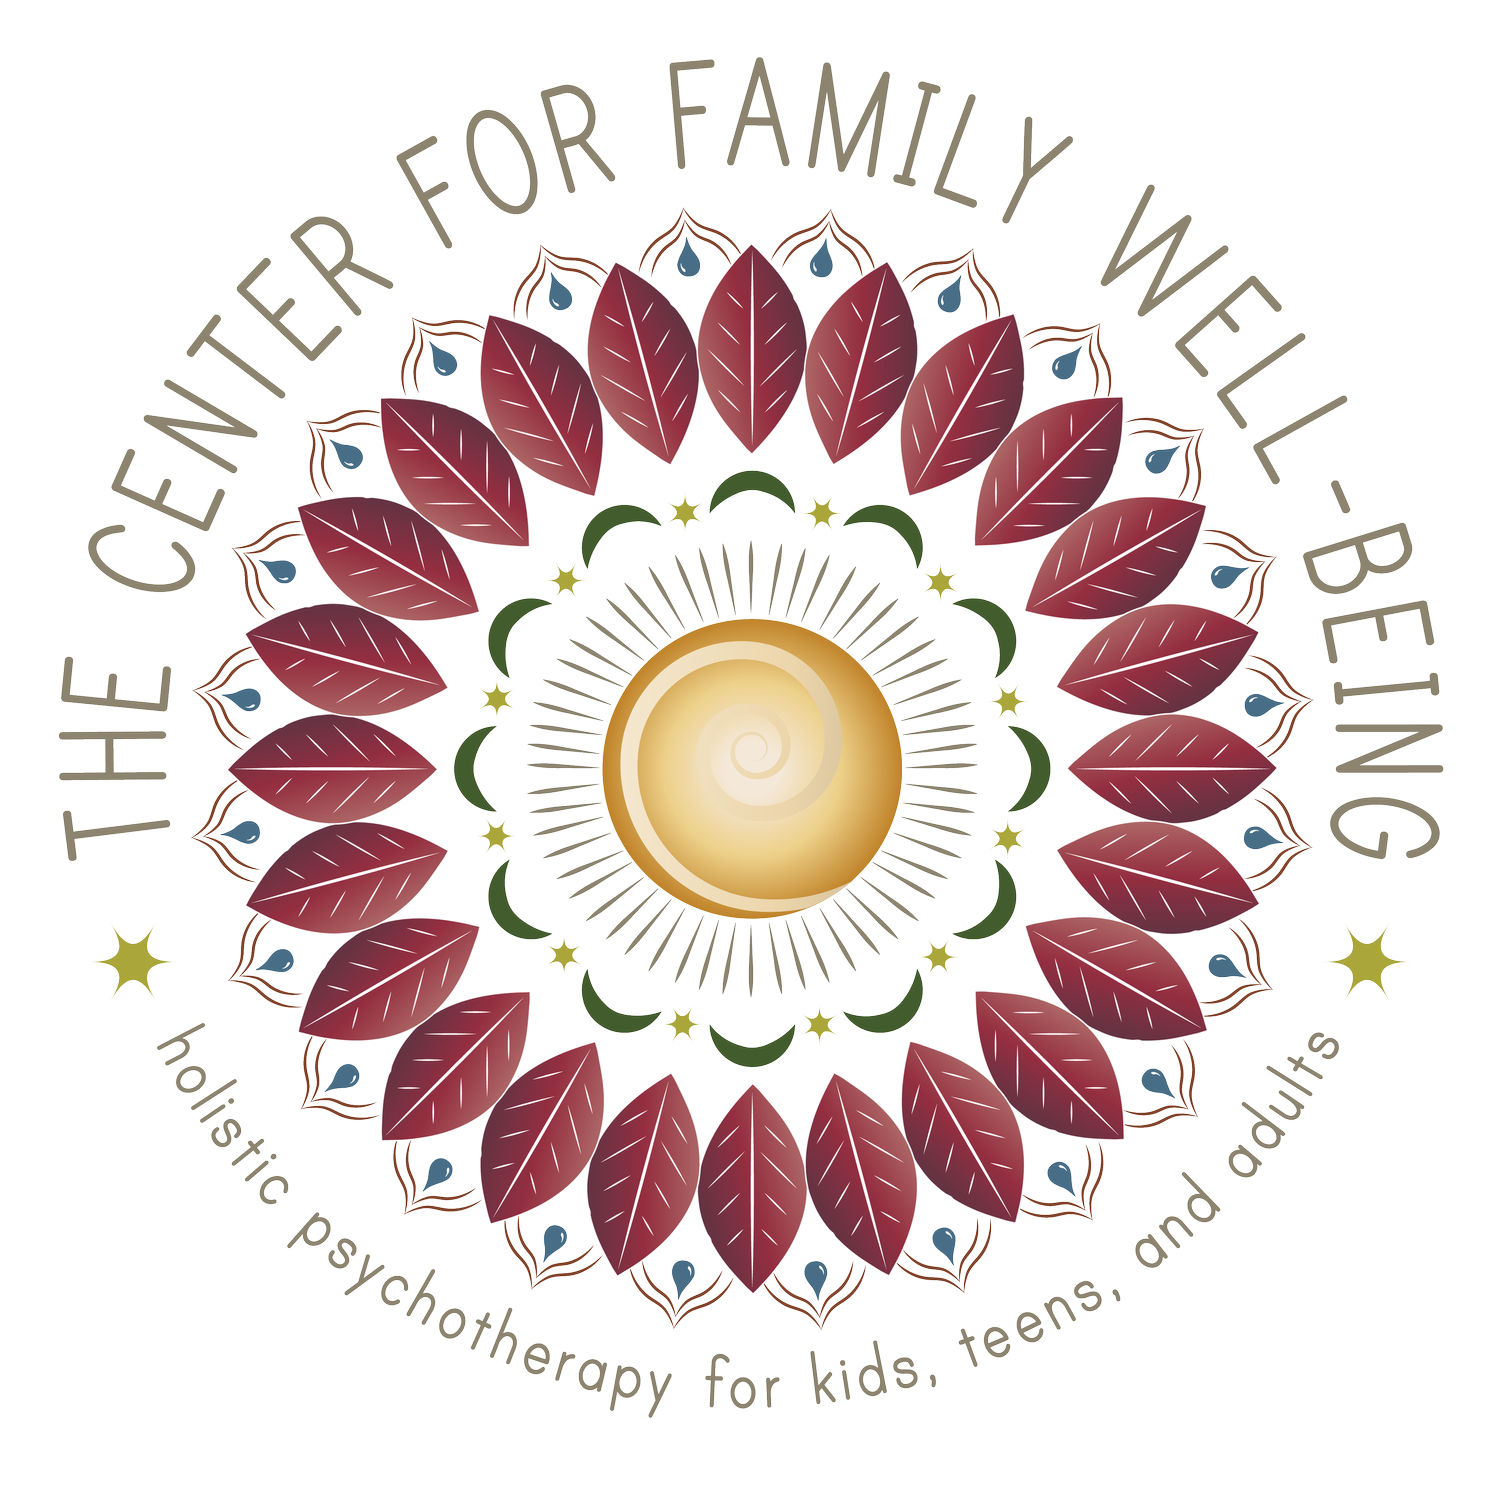 The Center For Family Well-Being